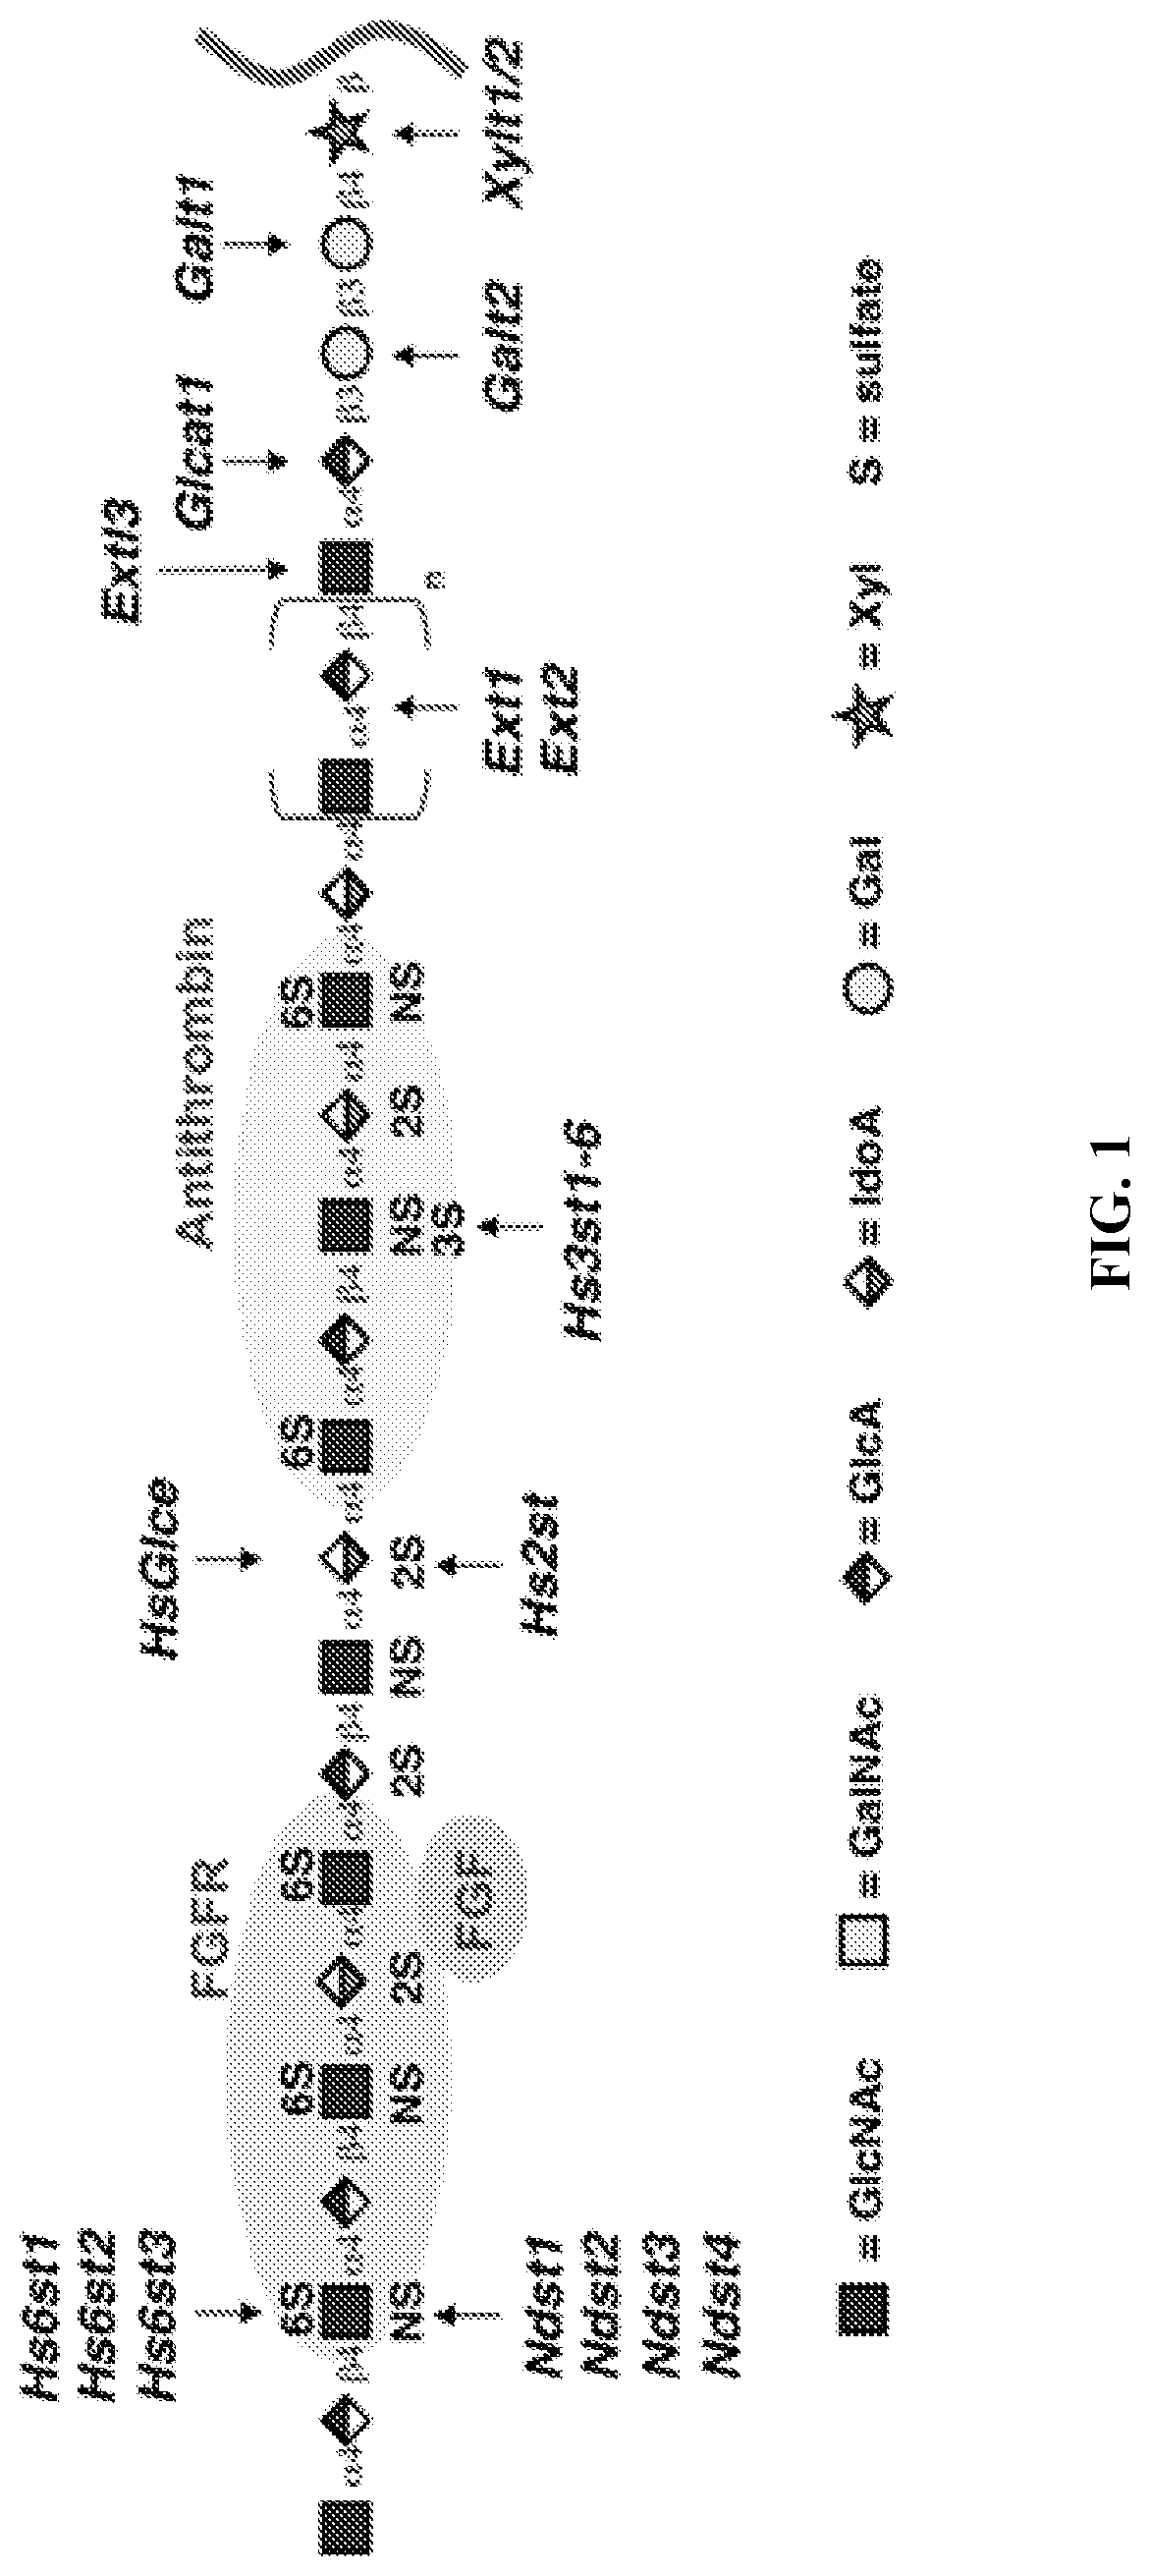 In vitro heparin and heparan sulfate compositions and methods of making and using